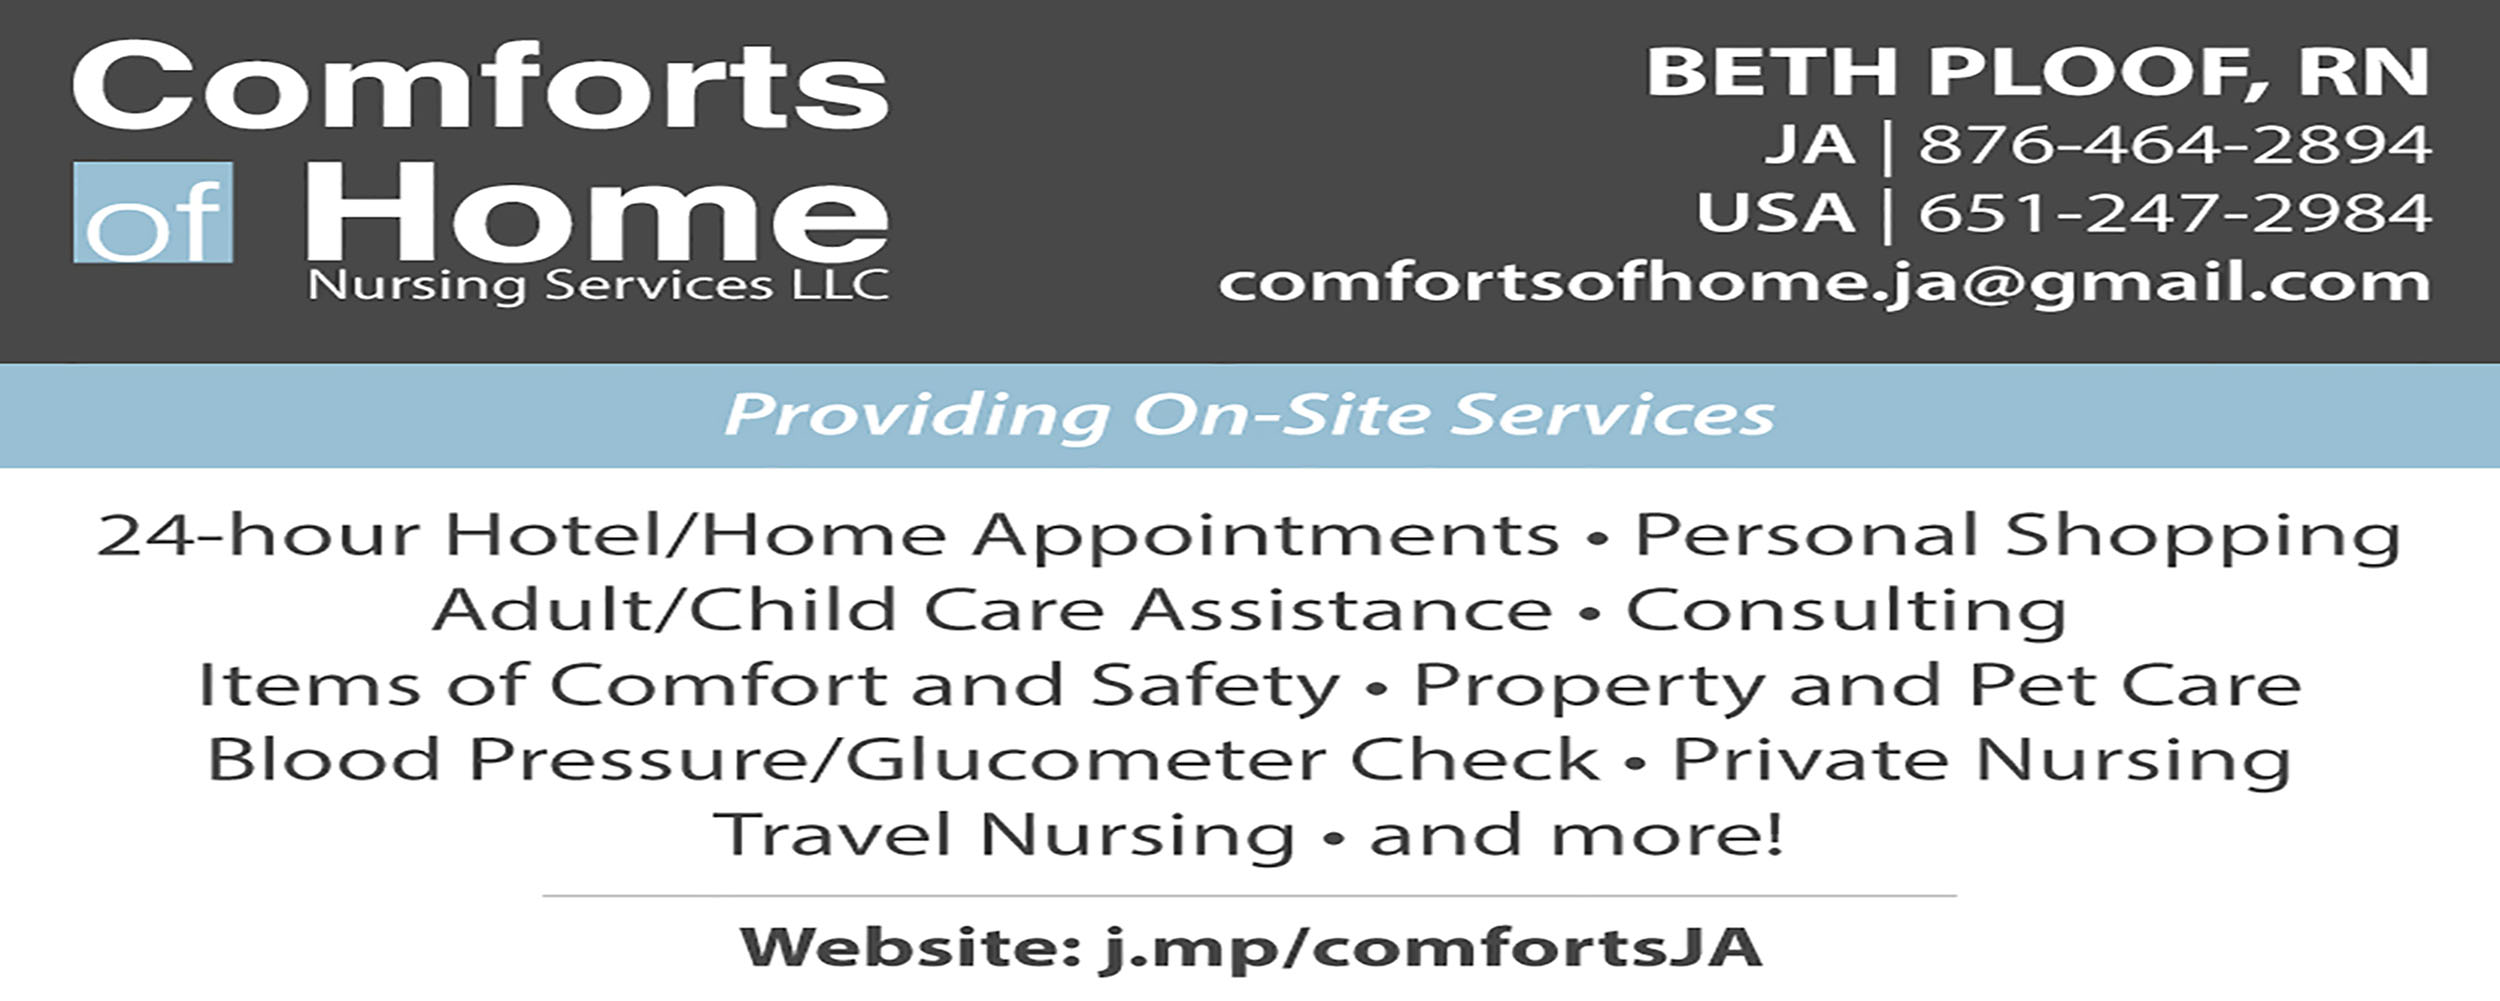 Comforts Of Home Nursing Services - West End Road - Negril Jamaica